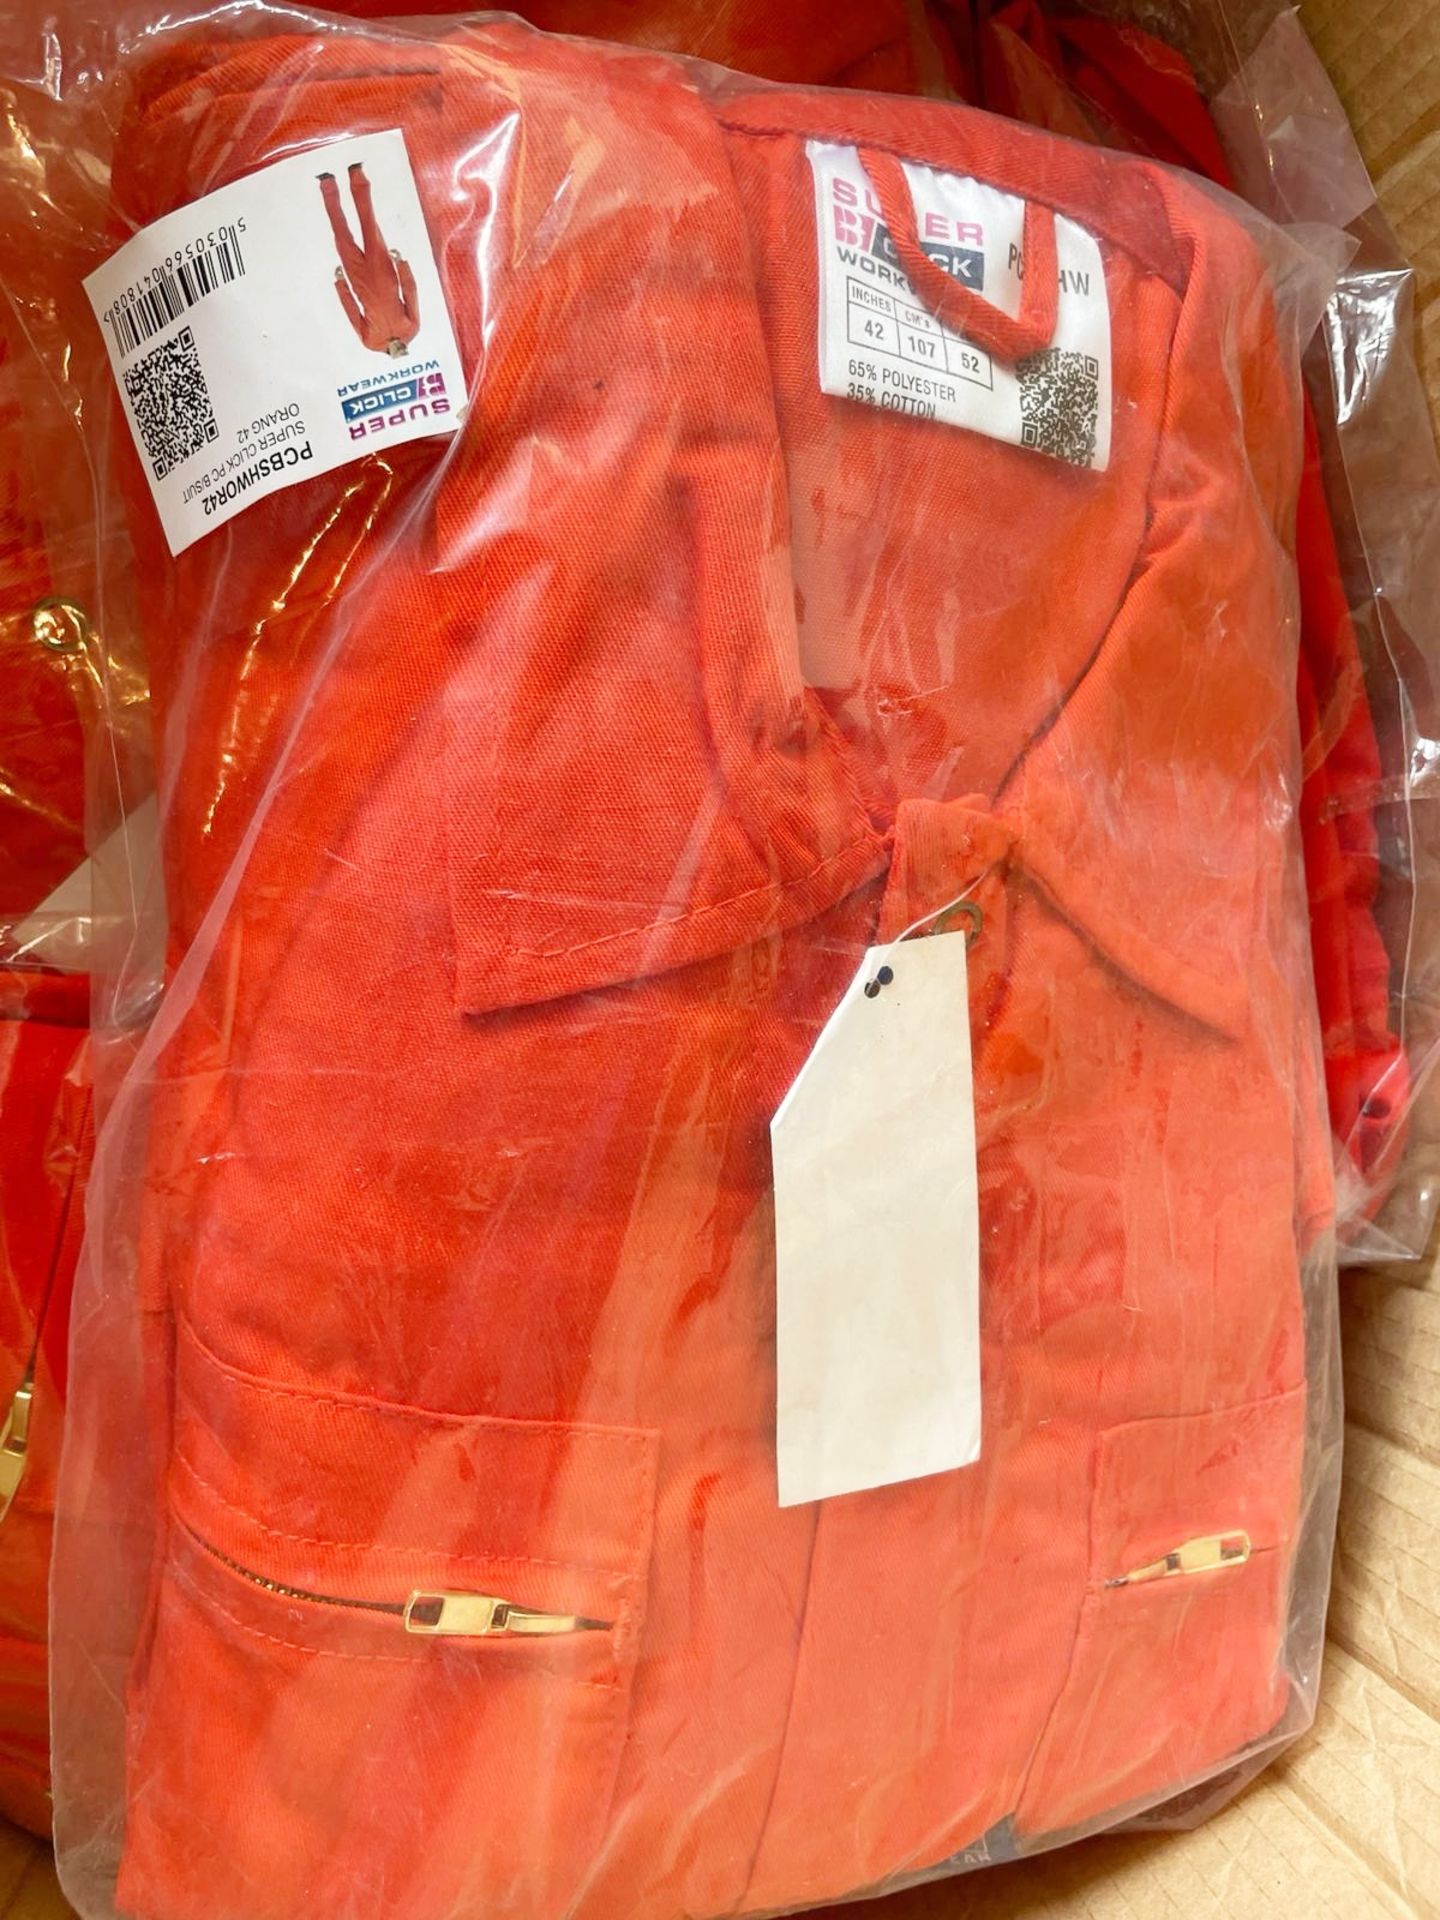 10 x Super Click Heavy Weight Orange Boilersuit - Size 42 / 46 - New in Packets - RRP £350 - Image 2 of 5